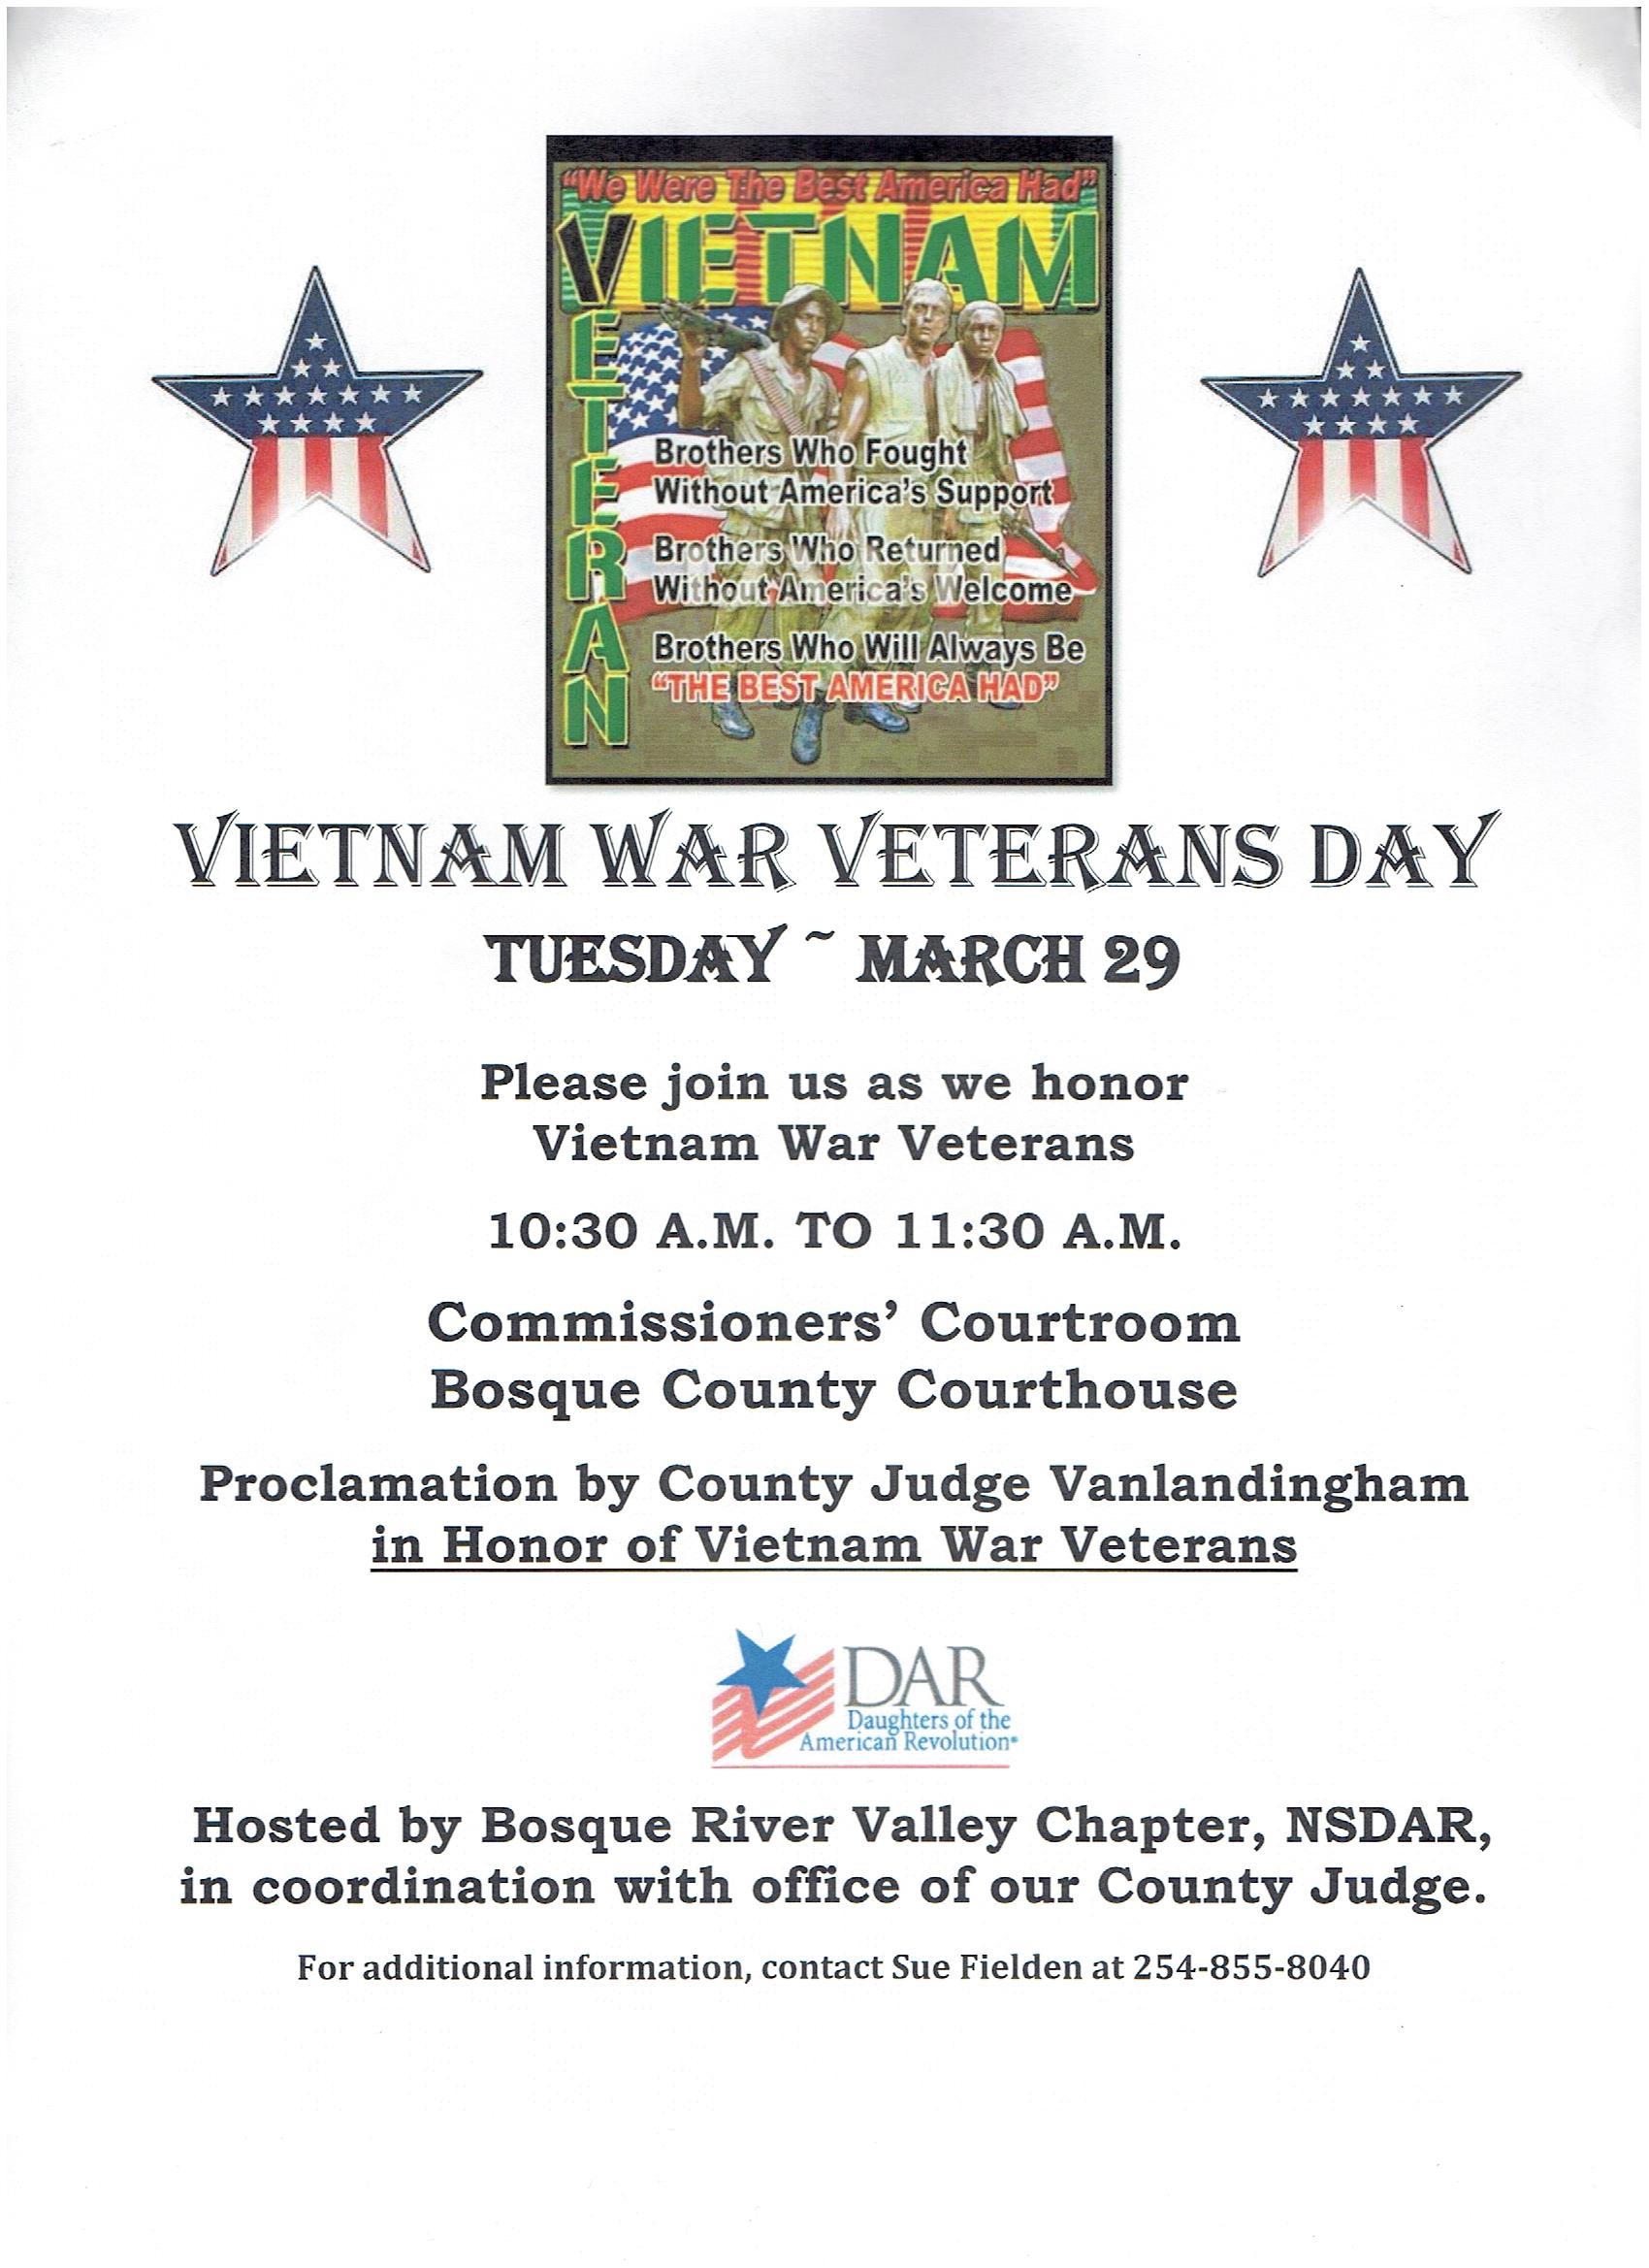 Vietnam War Veterans Day "Top of the Hill Country"